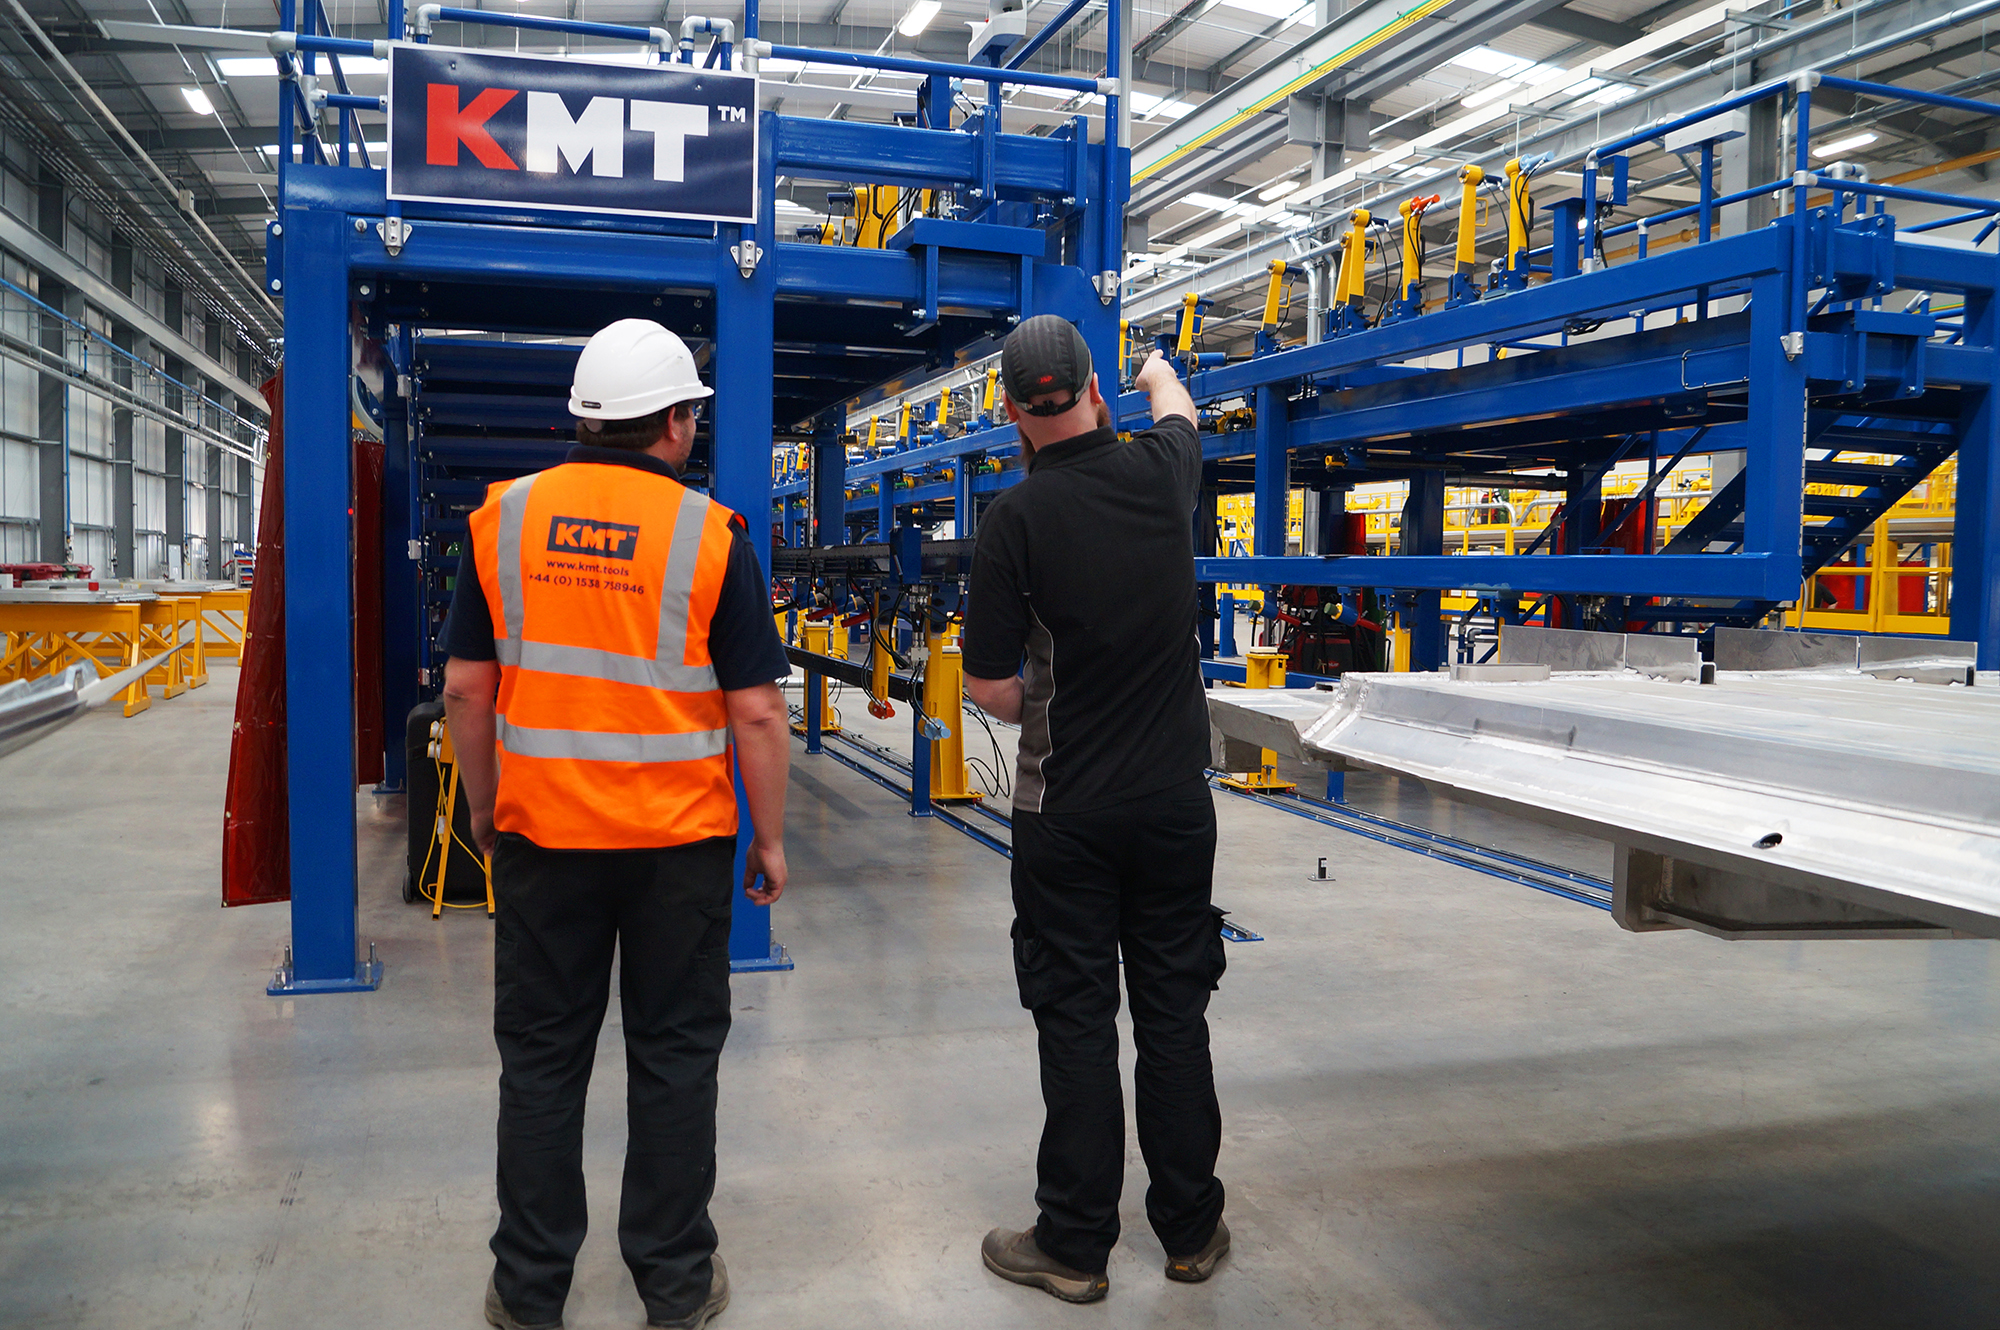 KM Tools can station specialists on-site 24/7 to provide a fast reaction to any maintenance requirements.